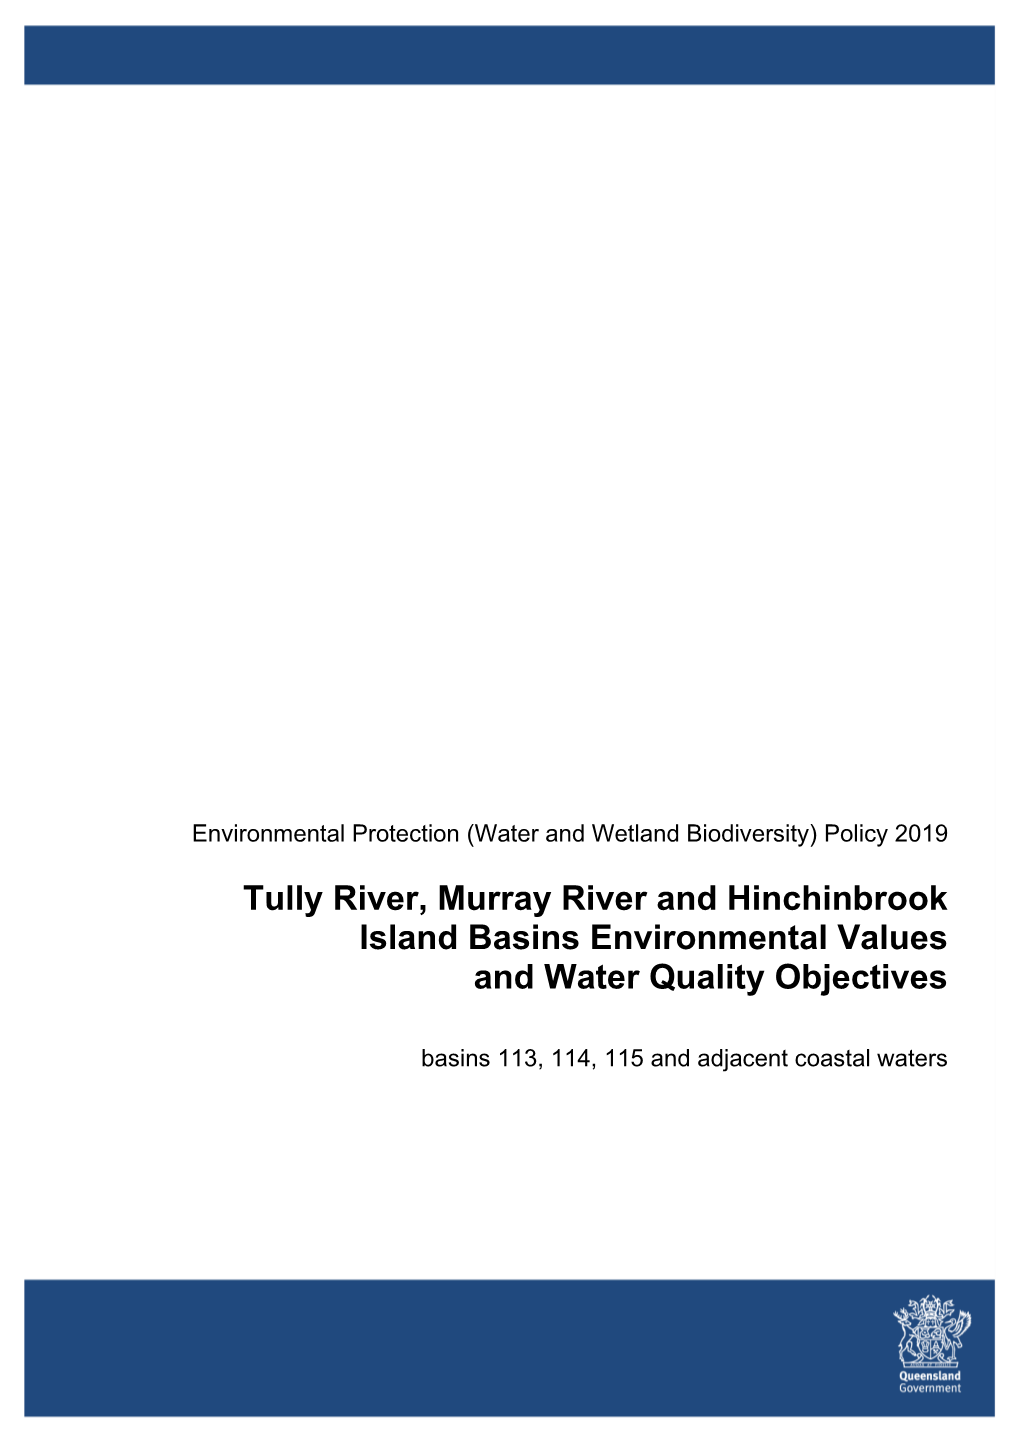 Tully River, Murray River and Hinchinbrook Island Basins Environmental Values and Water Quality Objectives